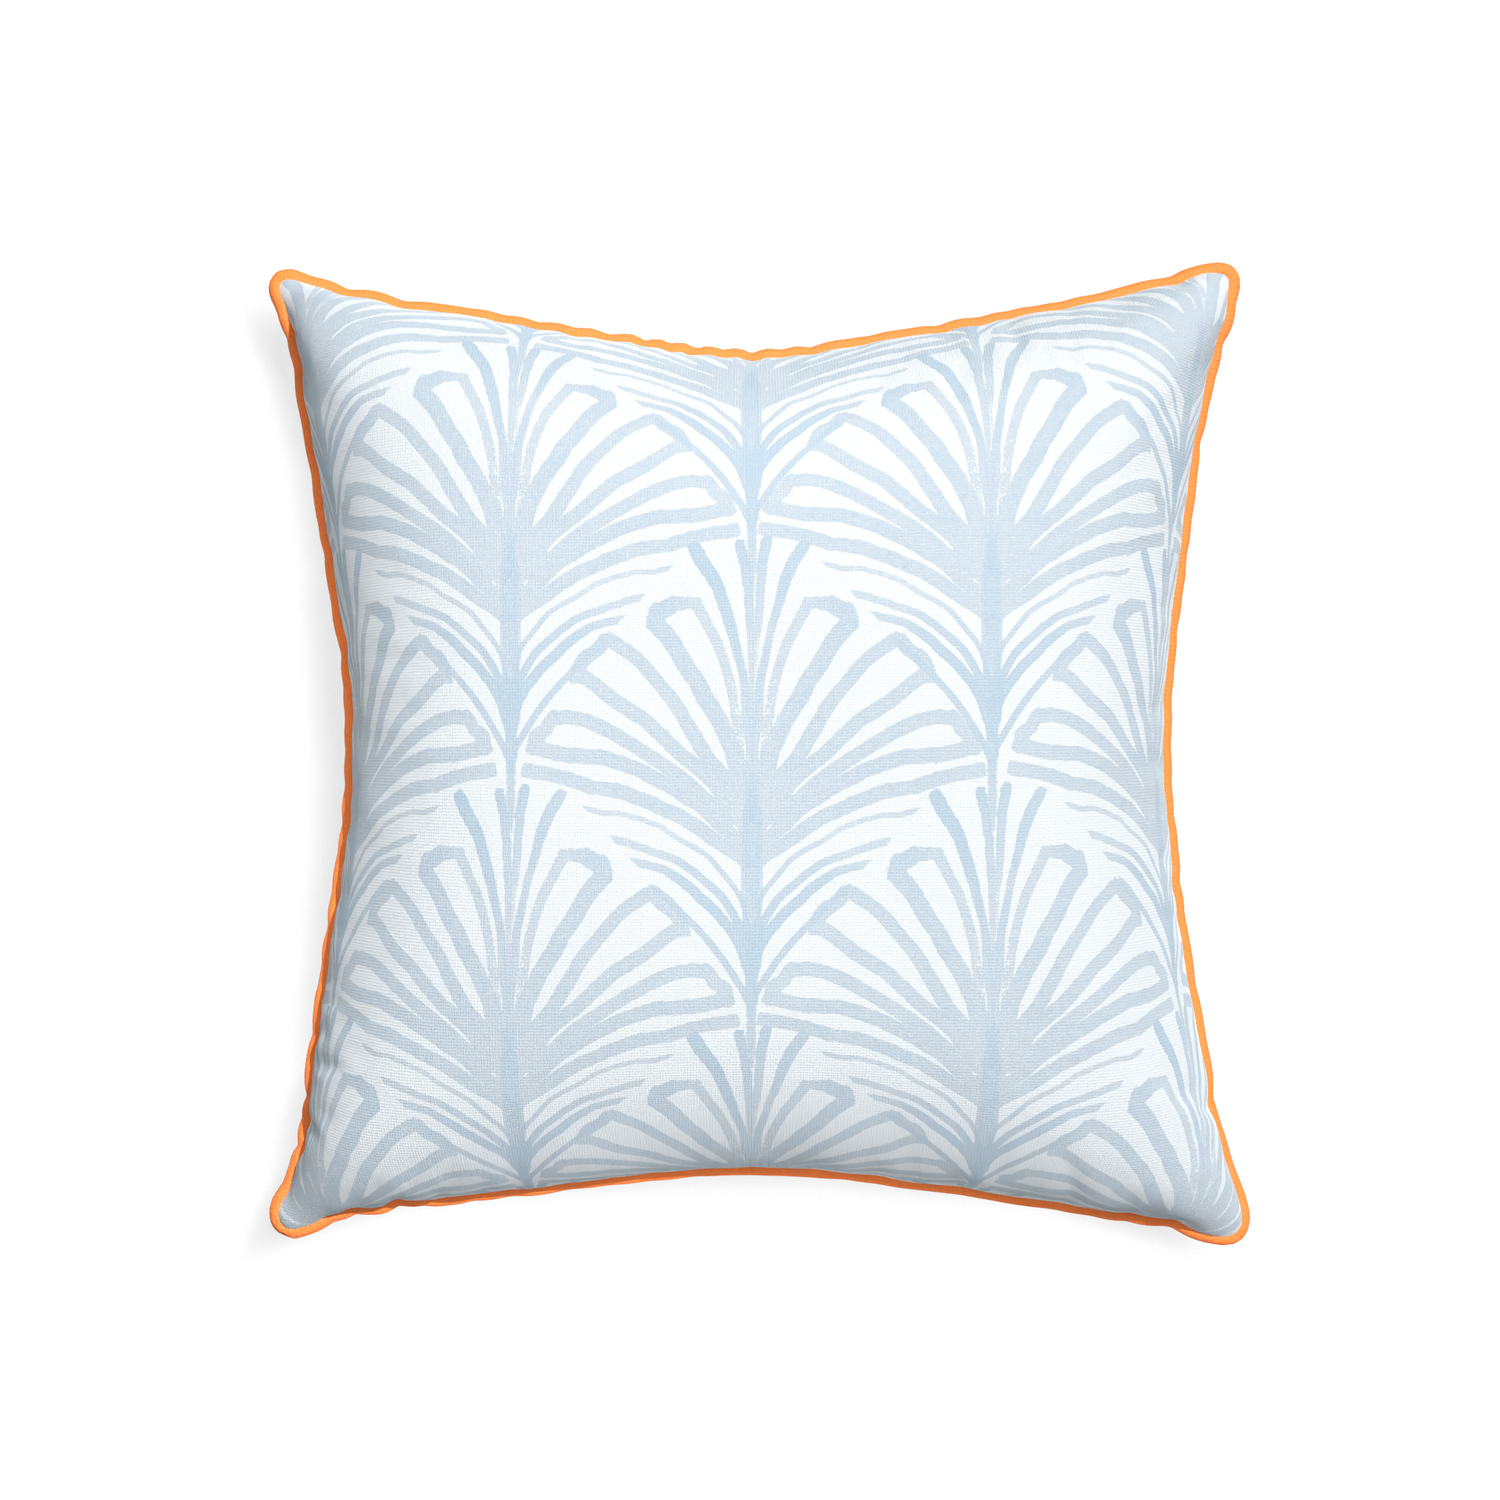 22-square suzy sky custom pillow with clementine piping on white background